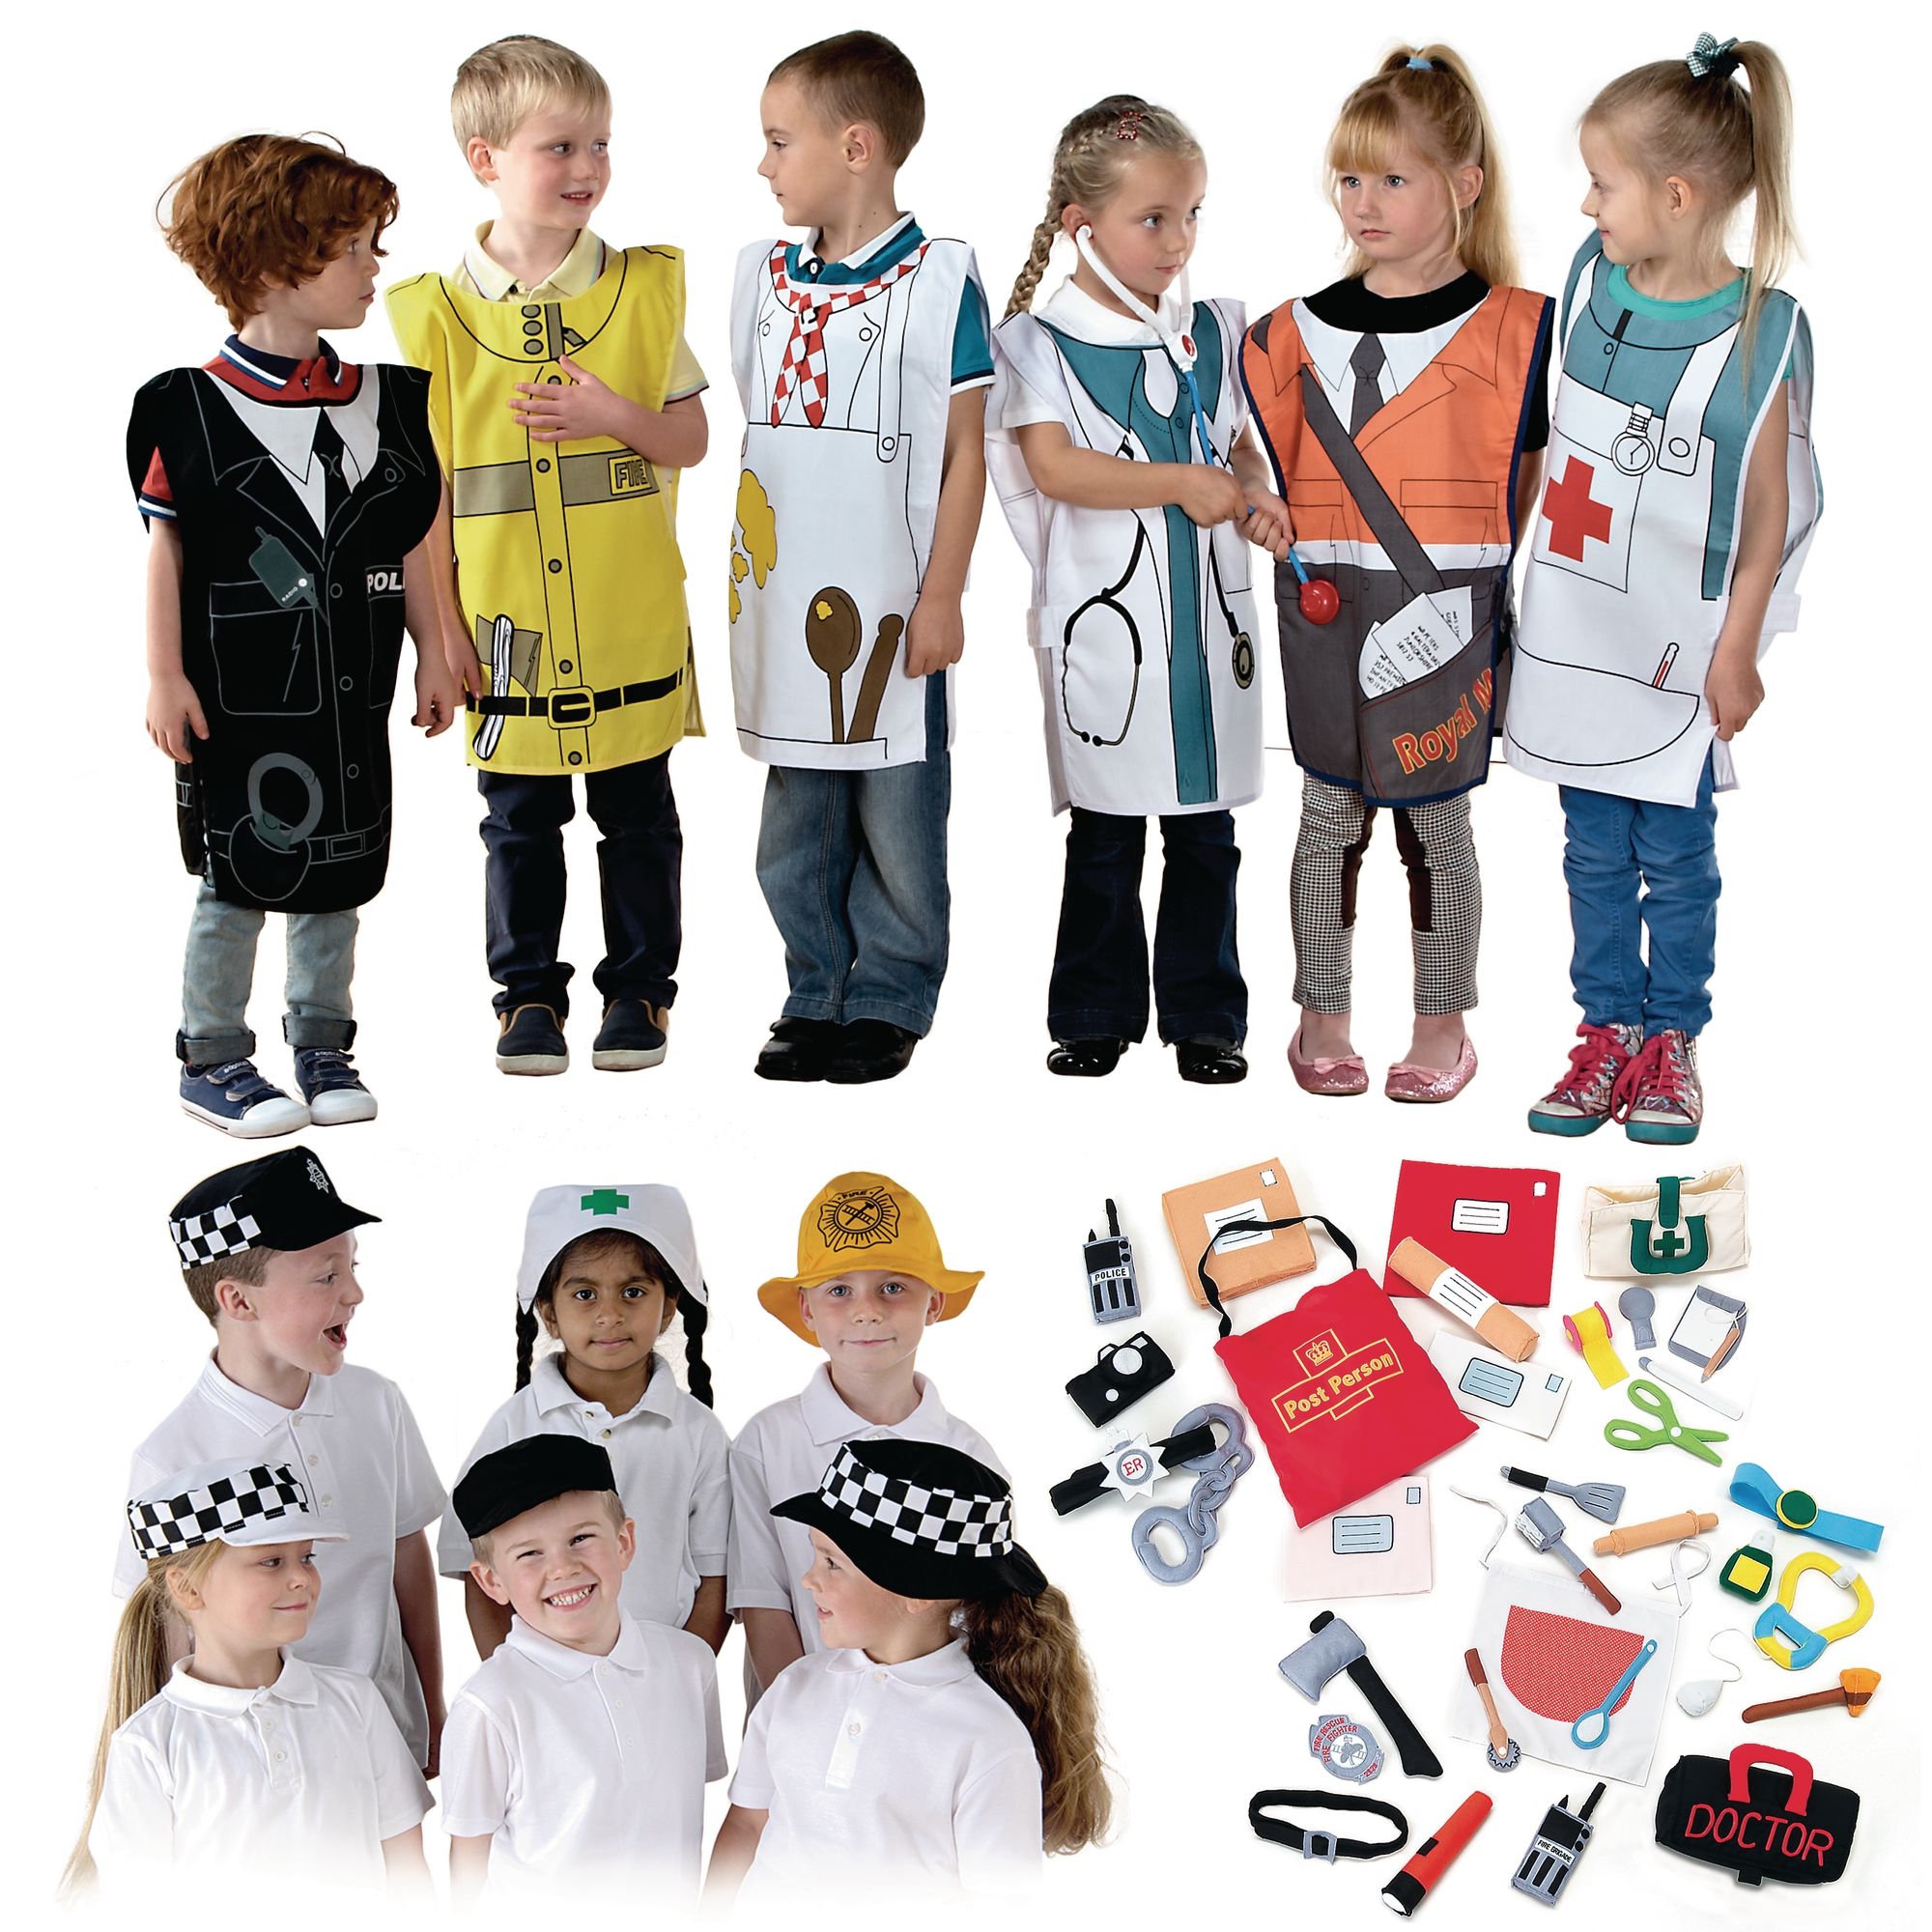 Tabards and Accessories Multibuy Offer